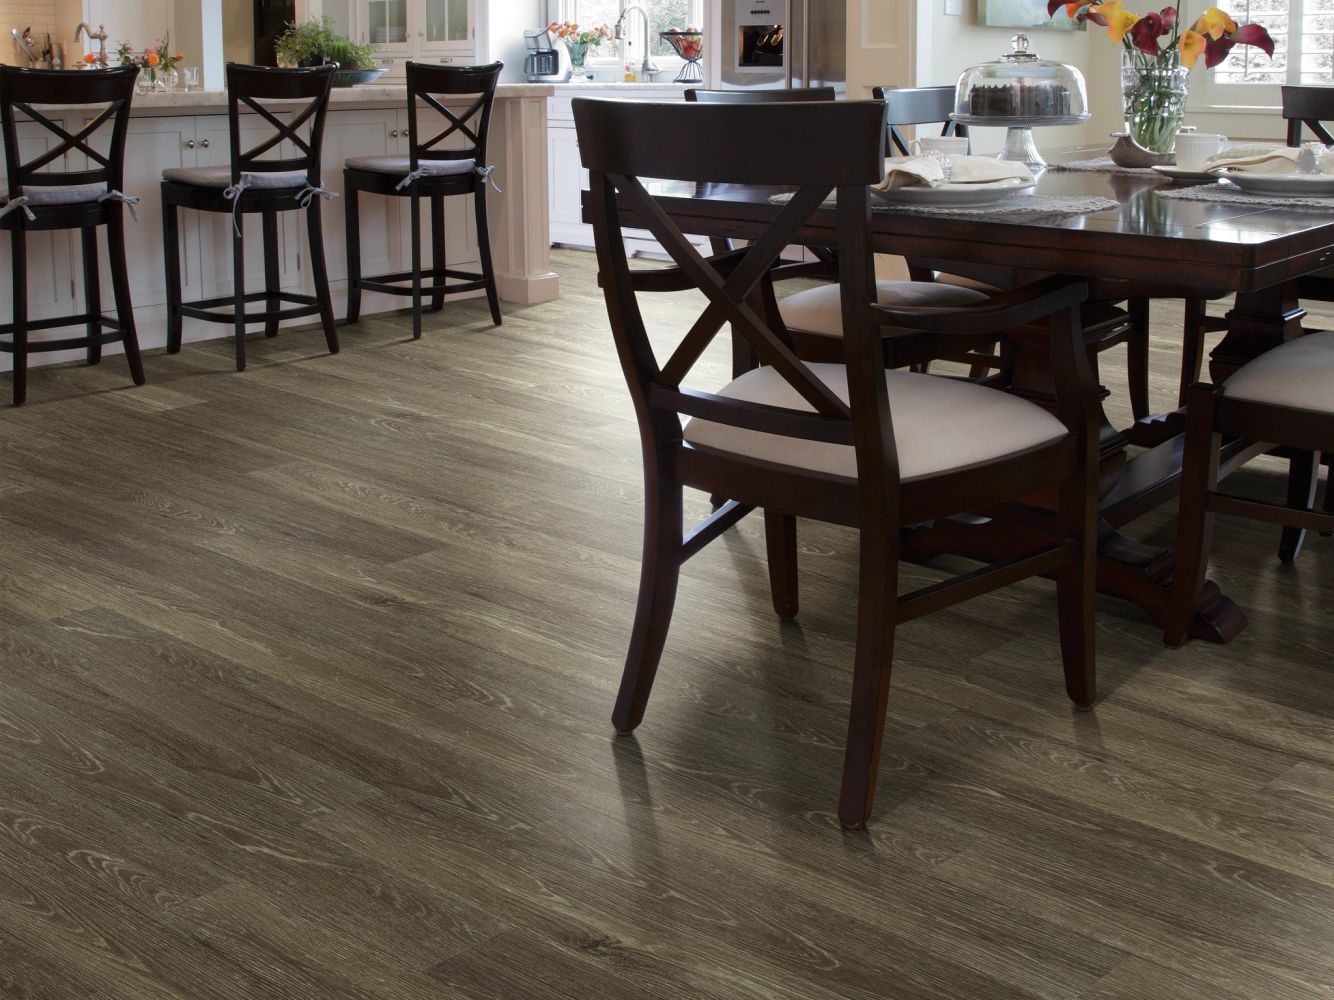 Shaw Floors Resilient Residential All American Anthem 00774_0799V